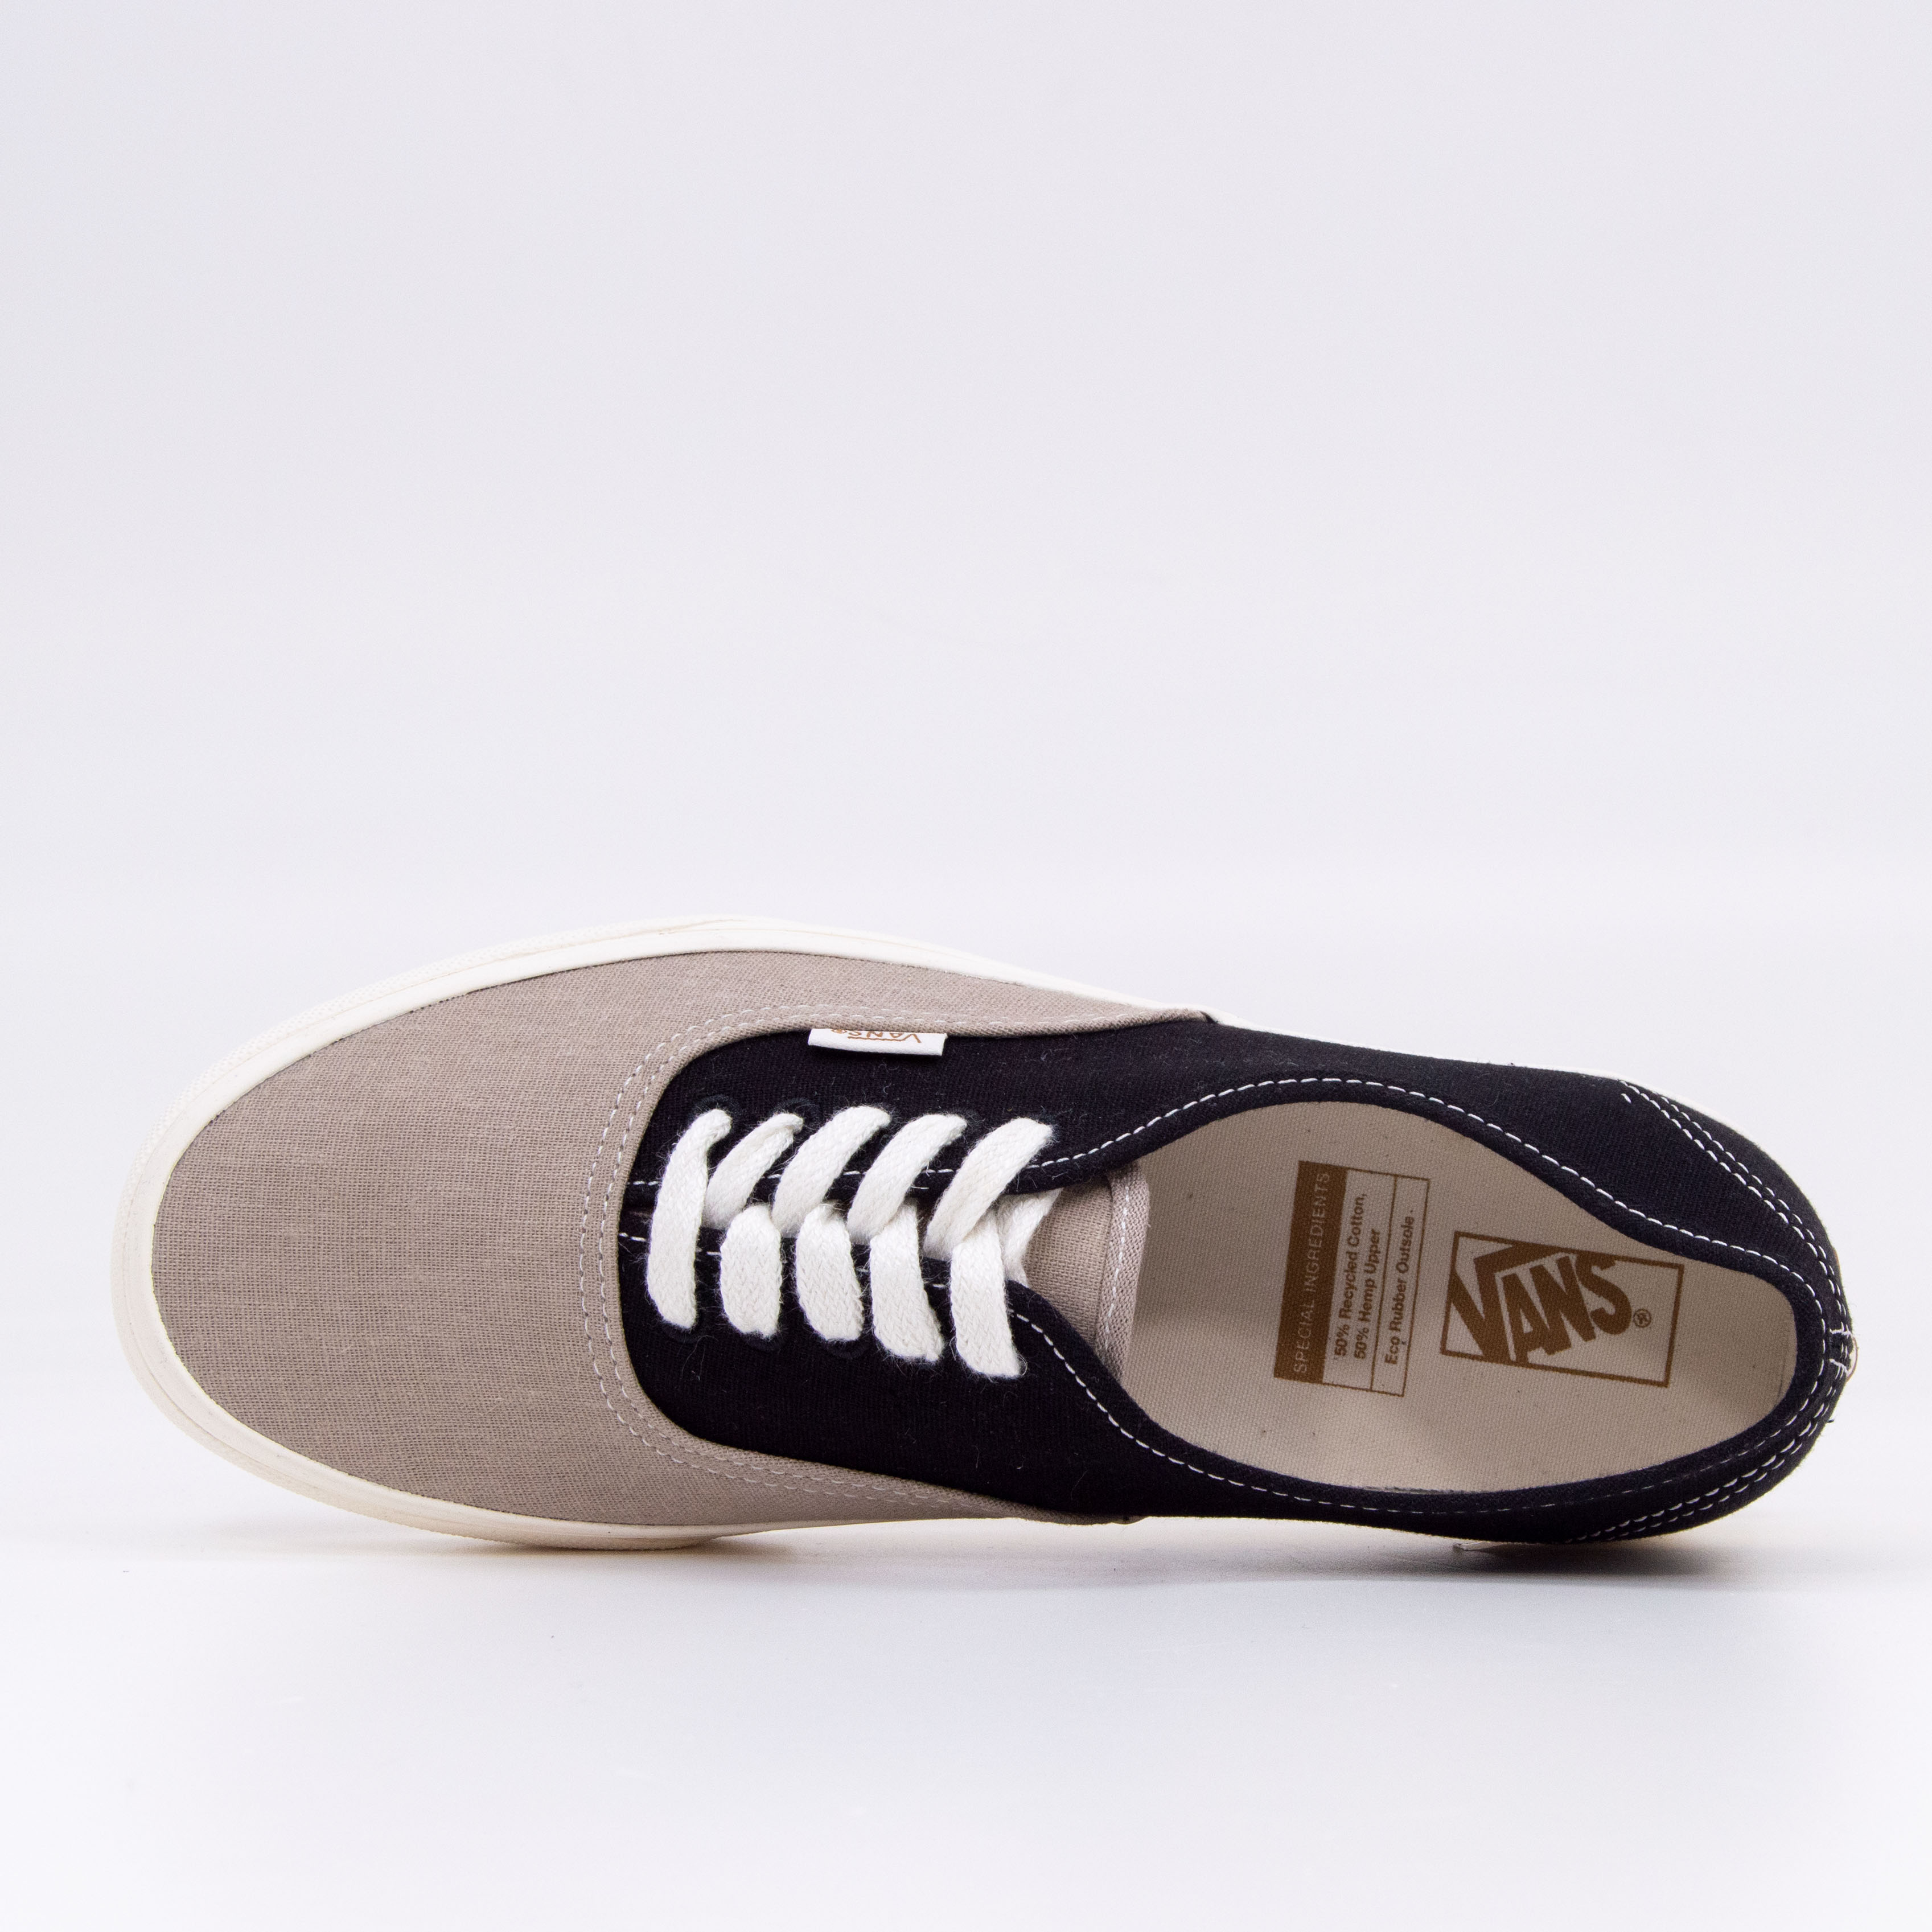 Vans - AUTHENTIC - (Eco Theory in Our Hands) - Multi Block Black